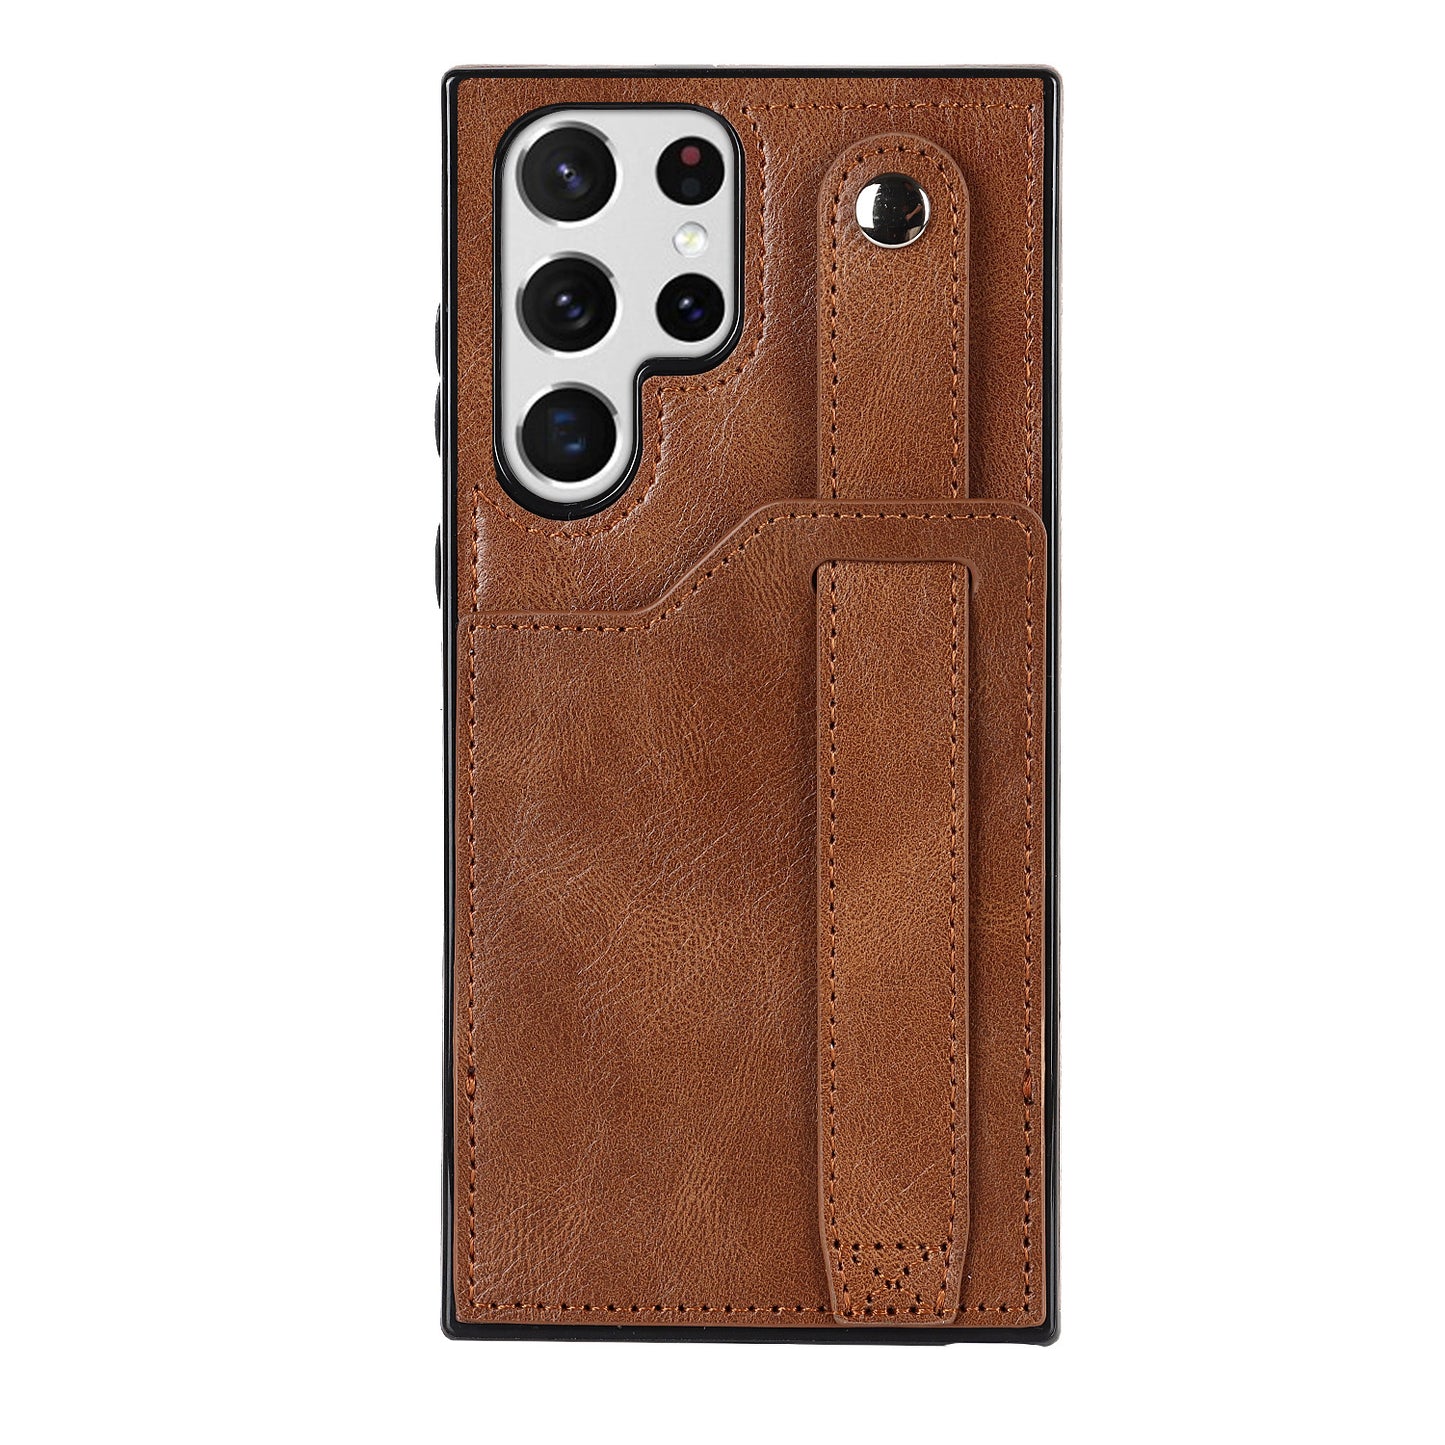 Applicable Wrist Strap Mobile Phone Skin Protective Leather Case